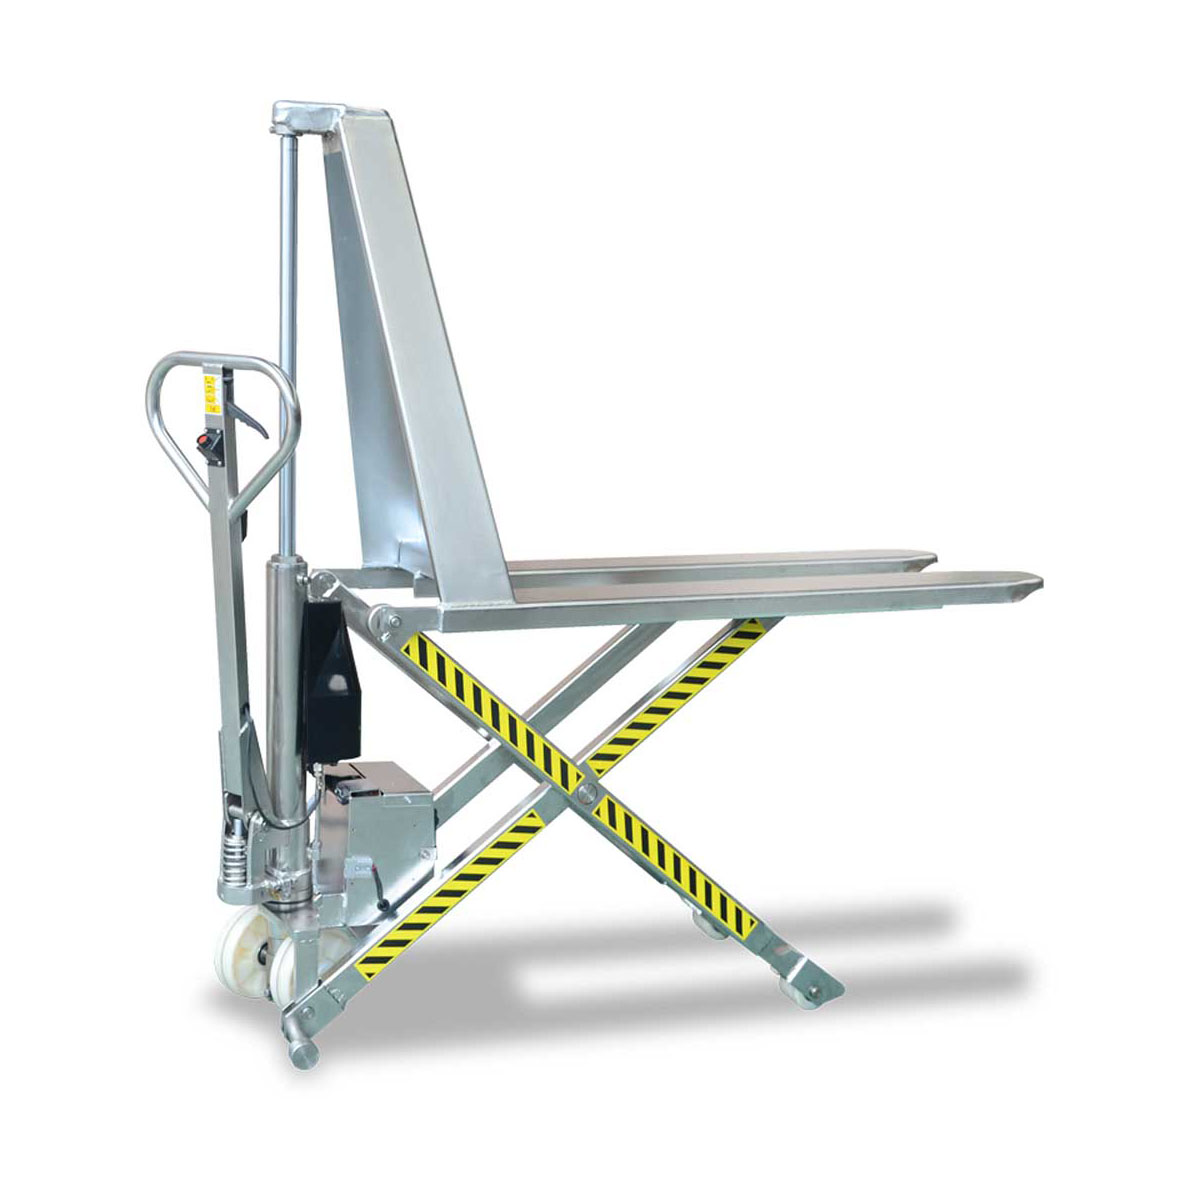 Buy Highlift Electric-lift Pallet Trucks (Stainless Steel) available at Astrolift NZ